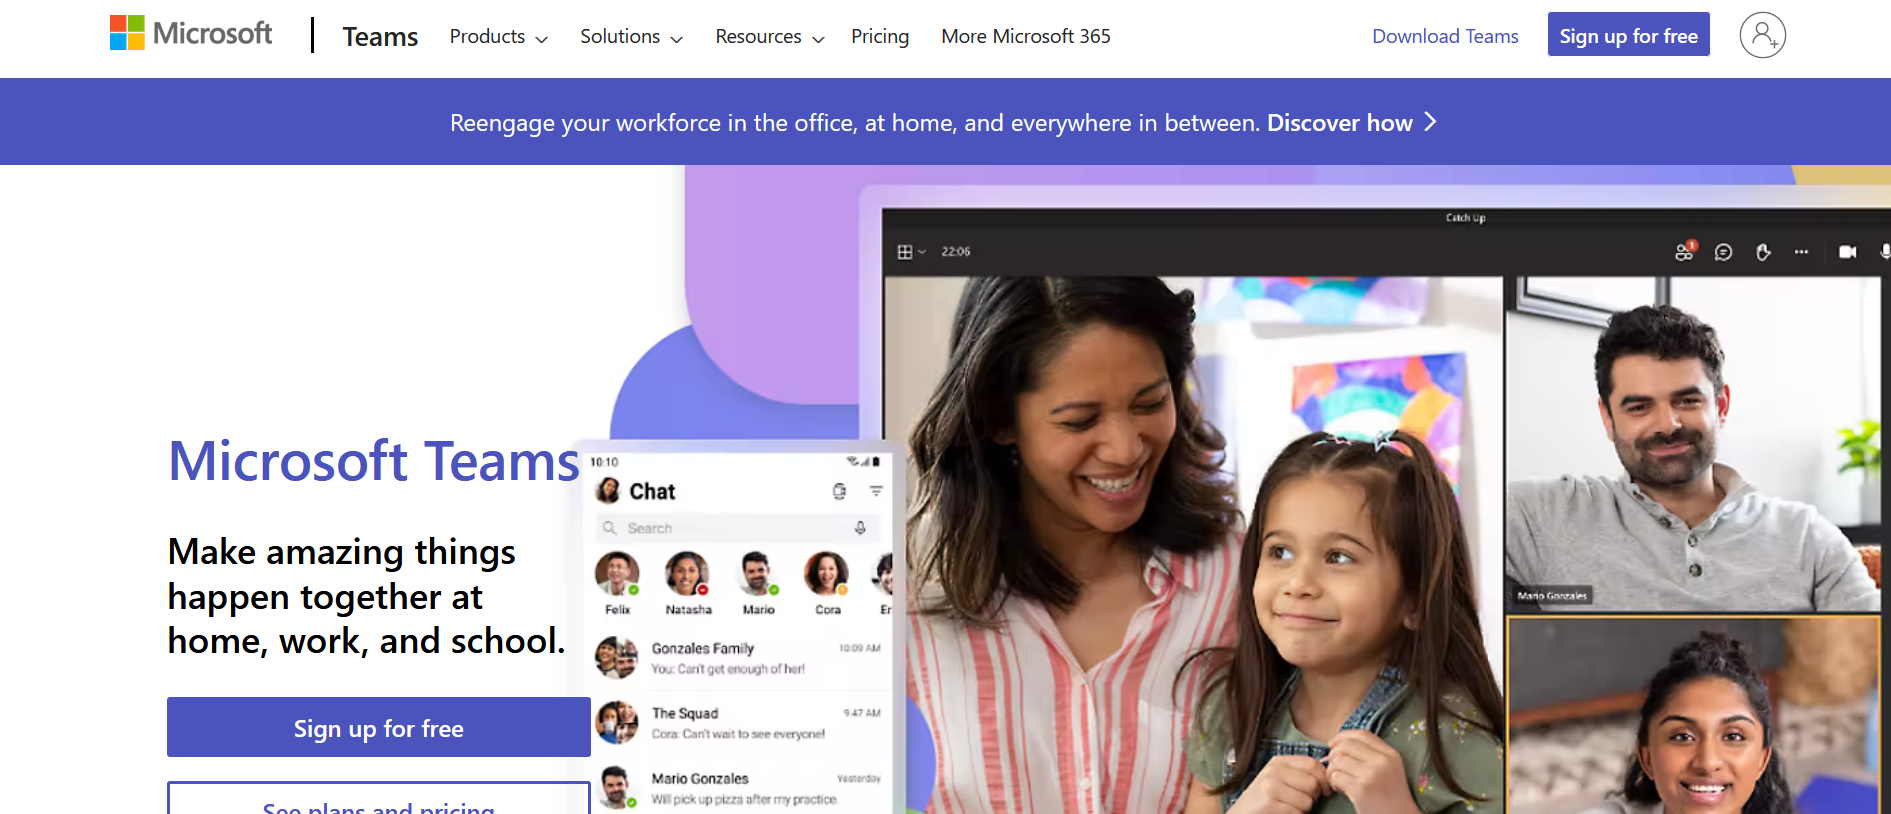 Overview of Microsoft Teams installation